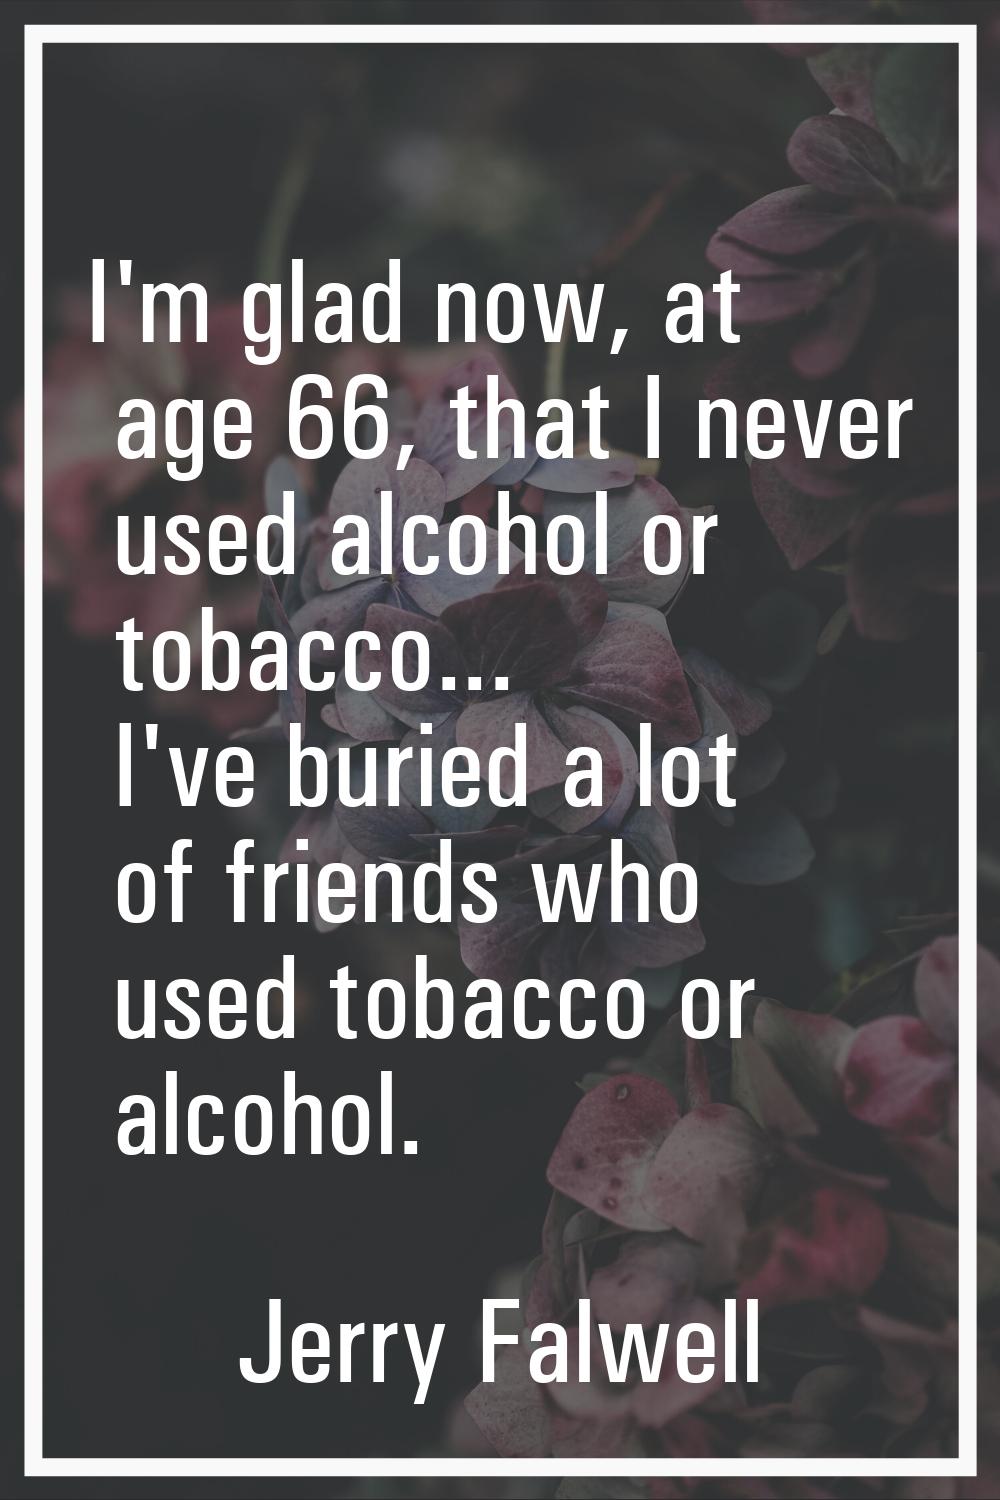 I'm glad now, at age 66, that I never used alcohol or tobacco... I've buried a lot of friends who u